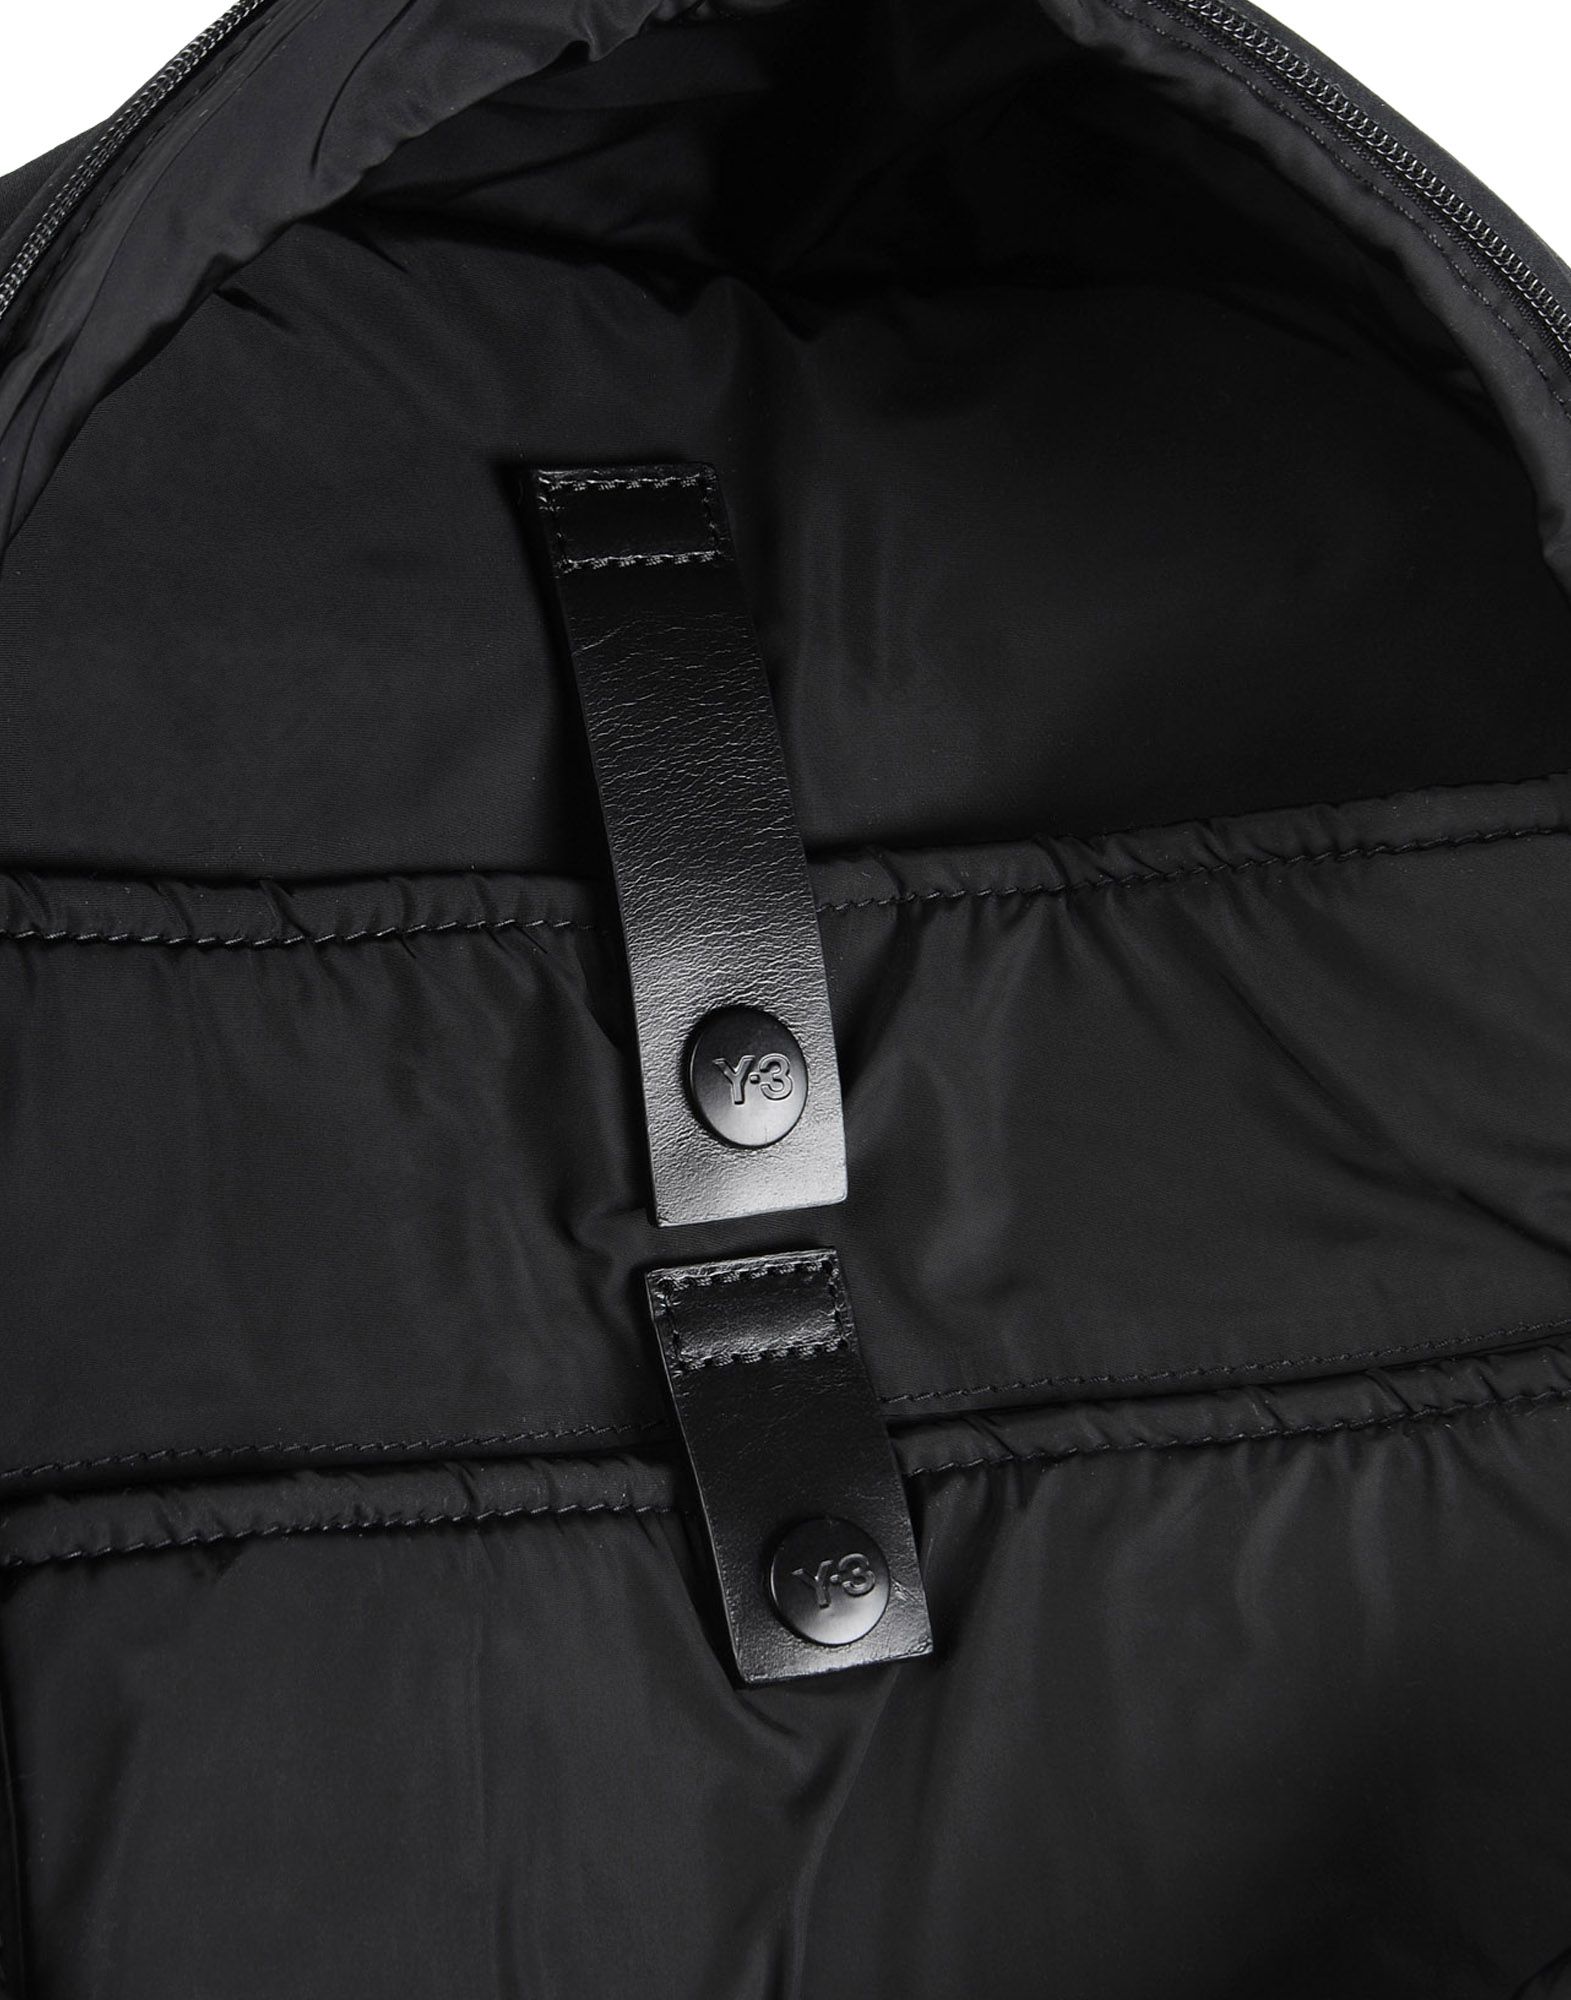 Y 3 FS ROUND BACKPACK for Women | Adidas Y-3 Official Store